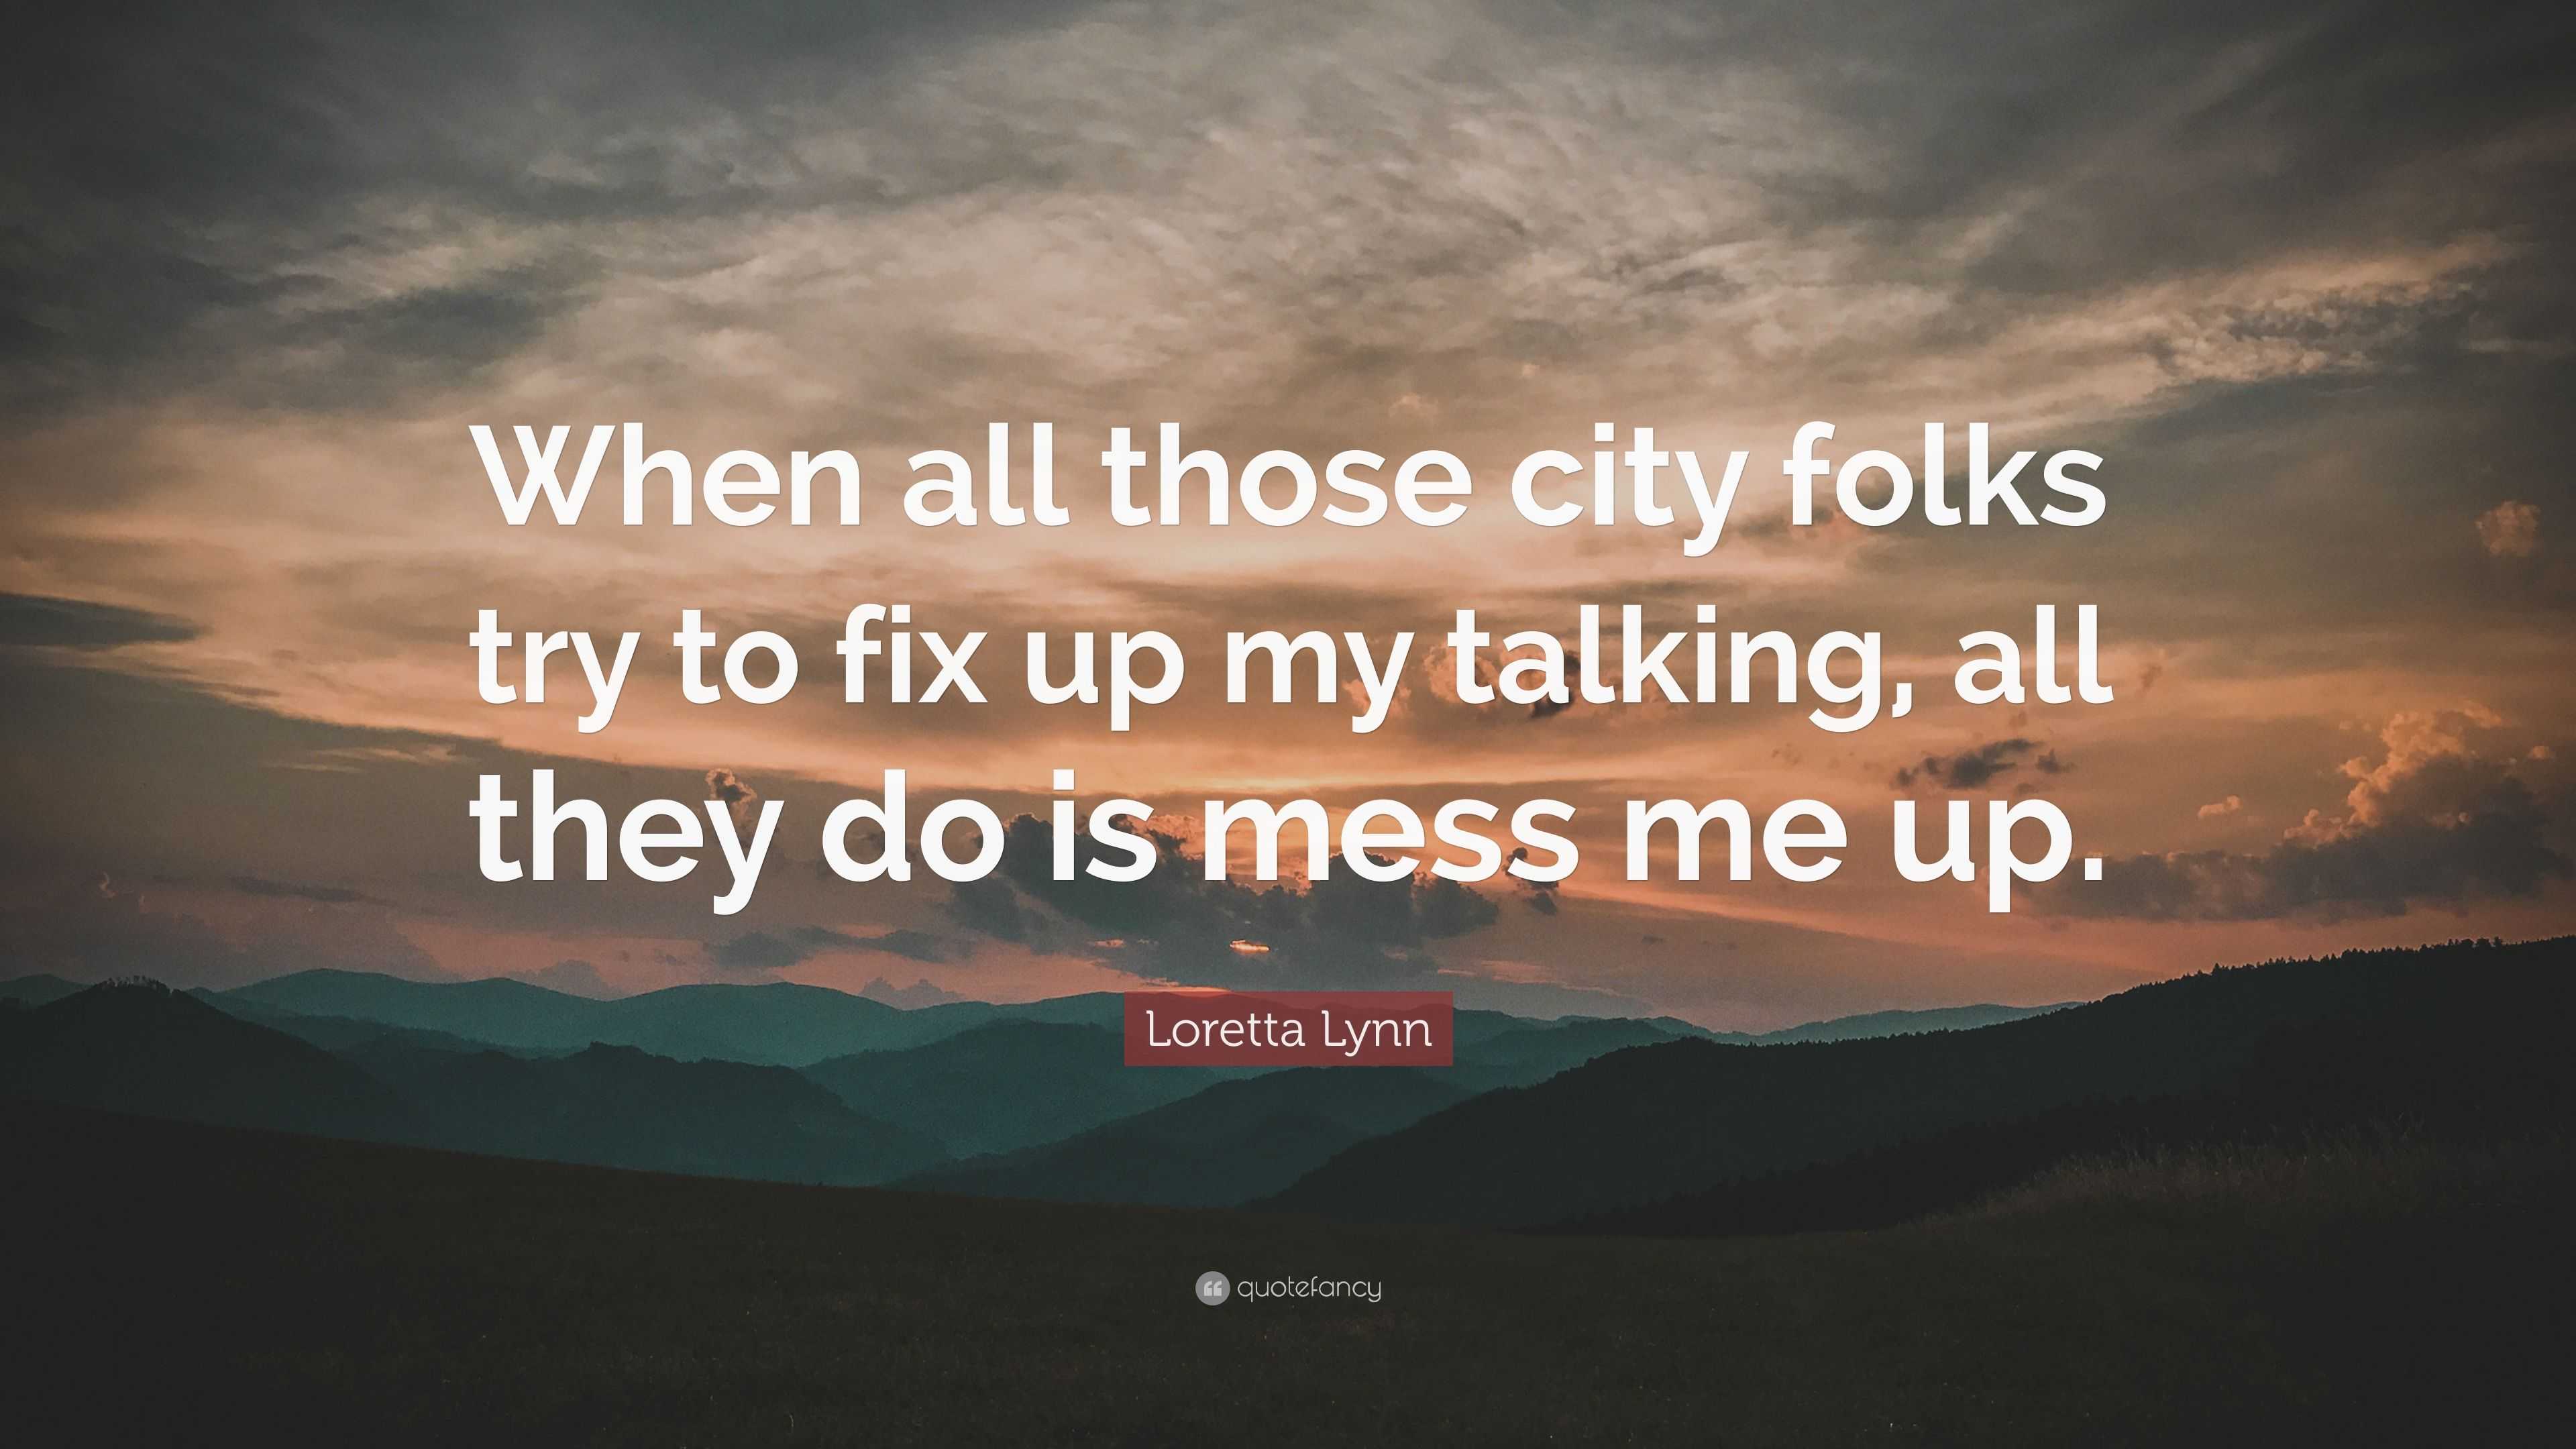 Loretta Lynn Quote: “When all those city folks try to fix up my talking ...